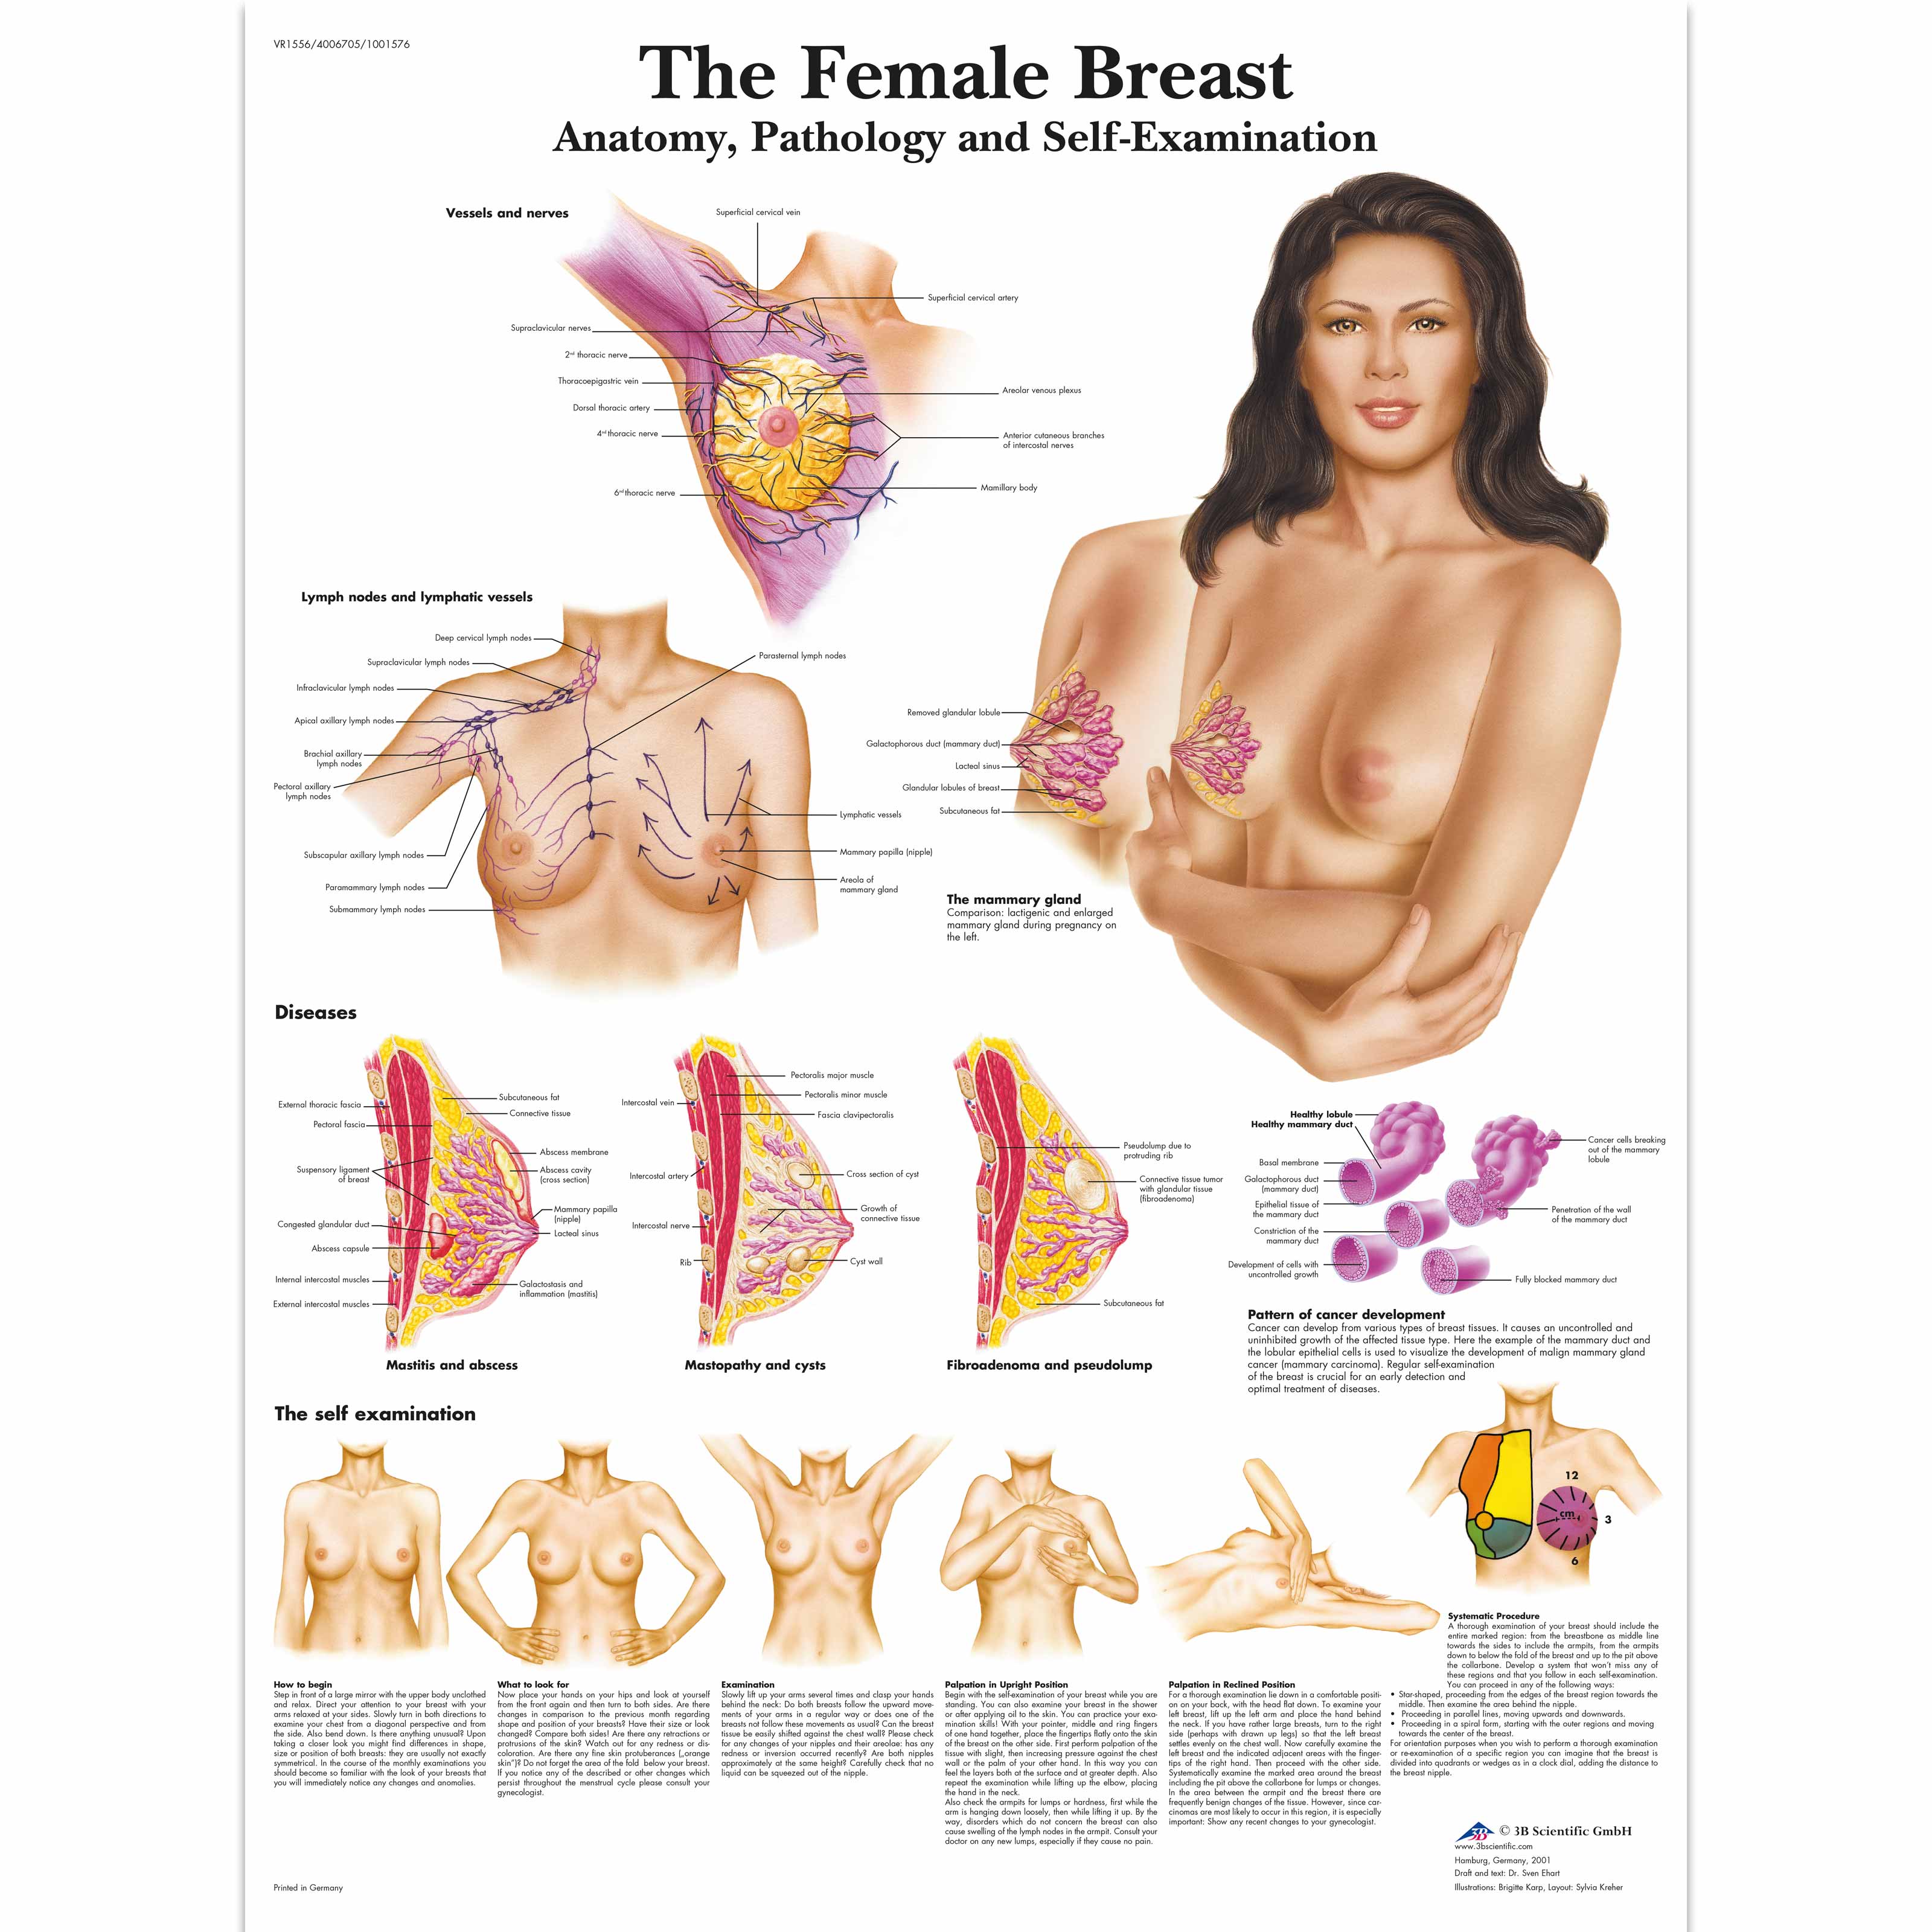 The anatomical structure of the female breast The shape and